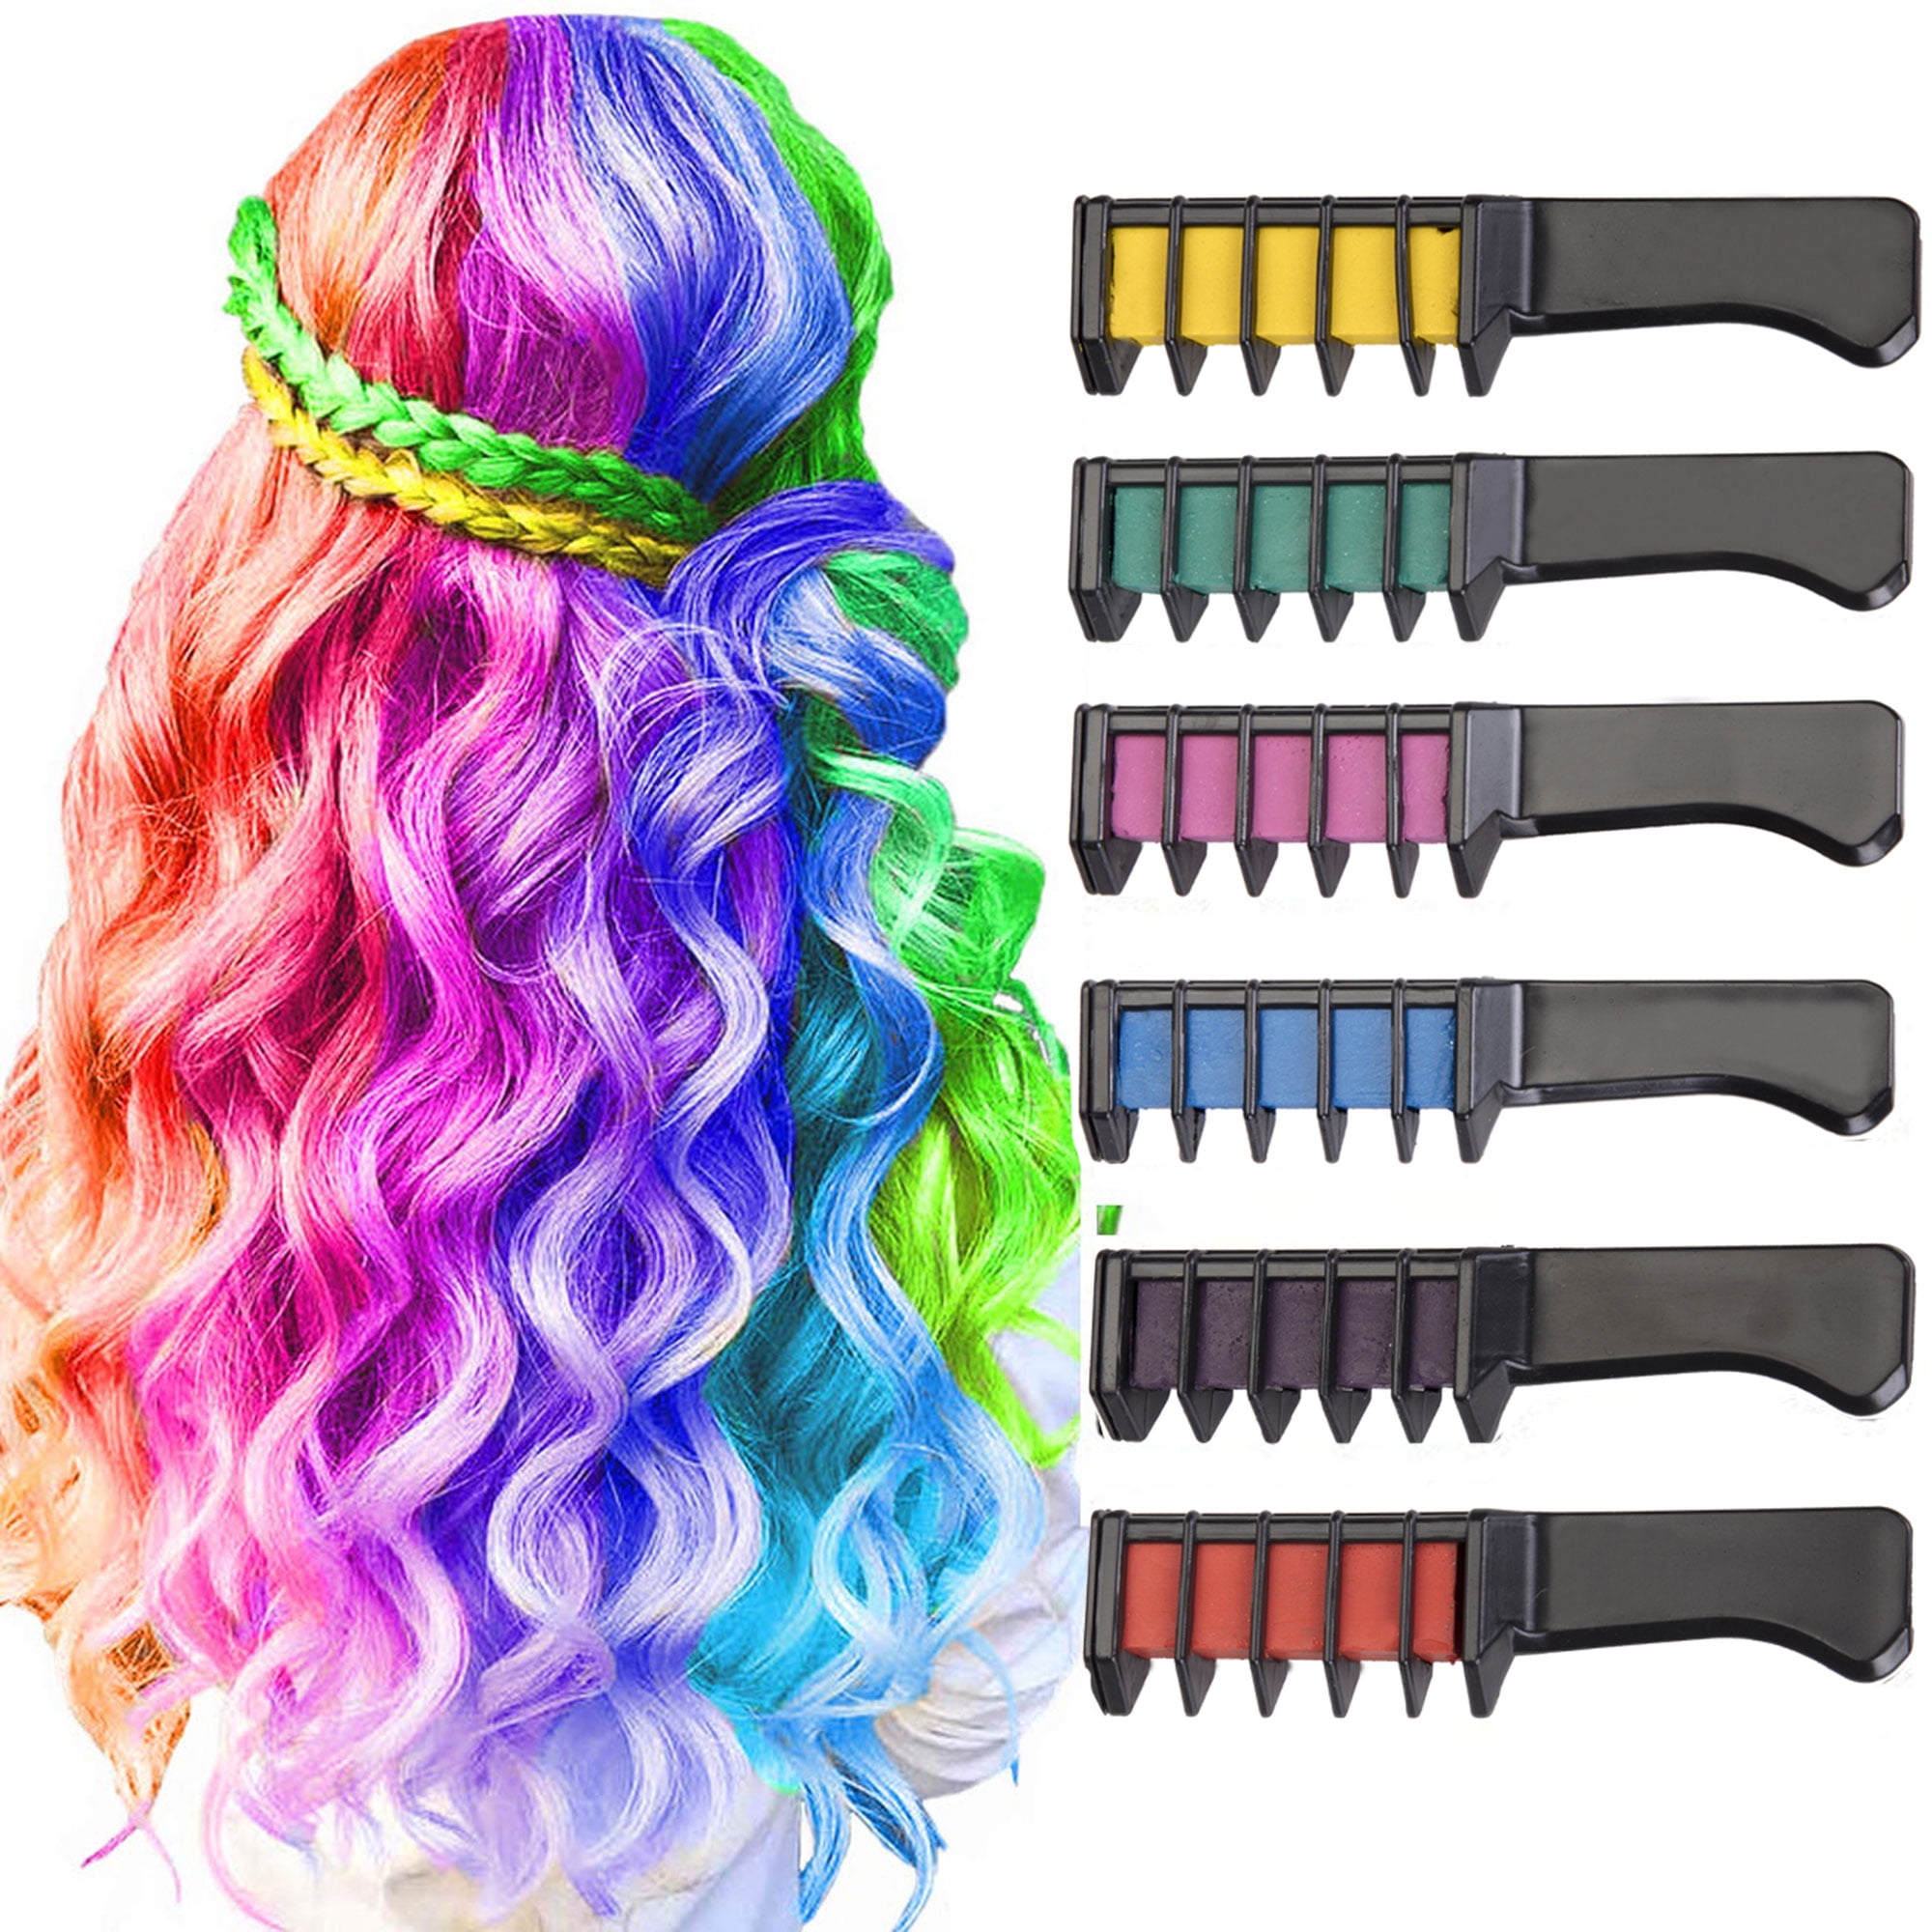 LELINTA 6 Color Hair Chalk for Kids Washable,Temporary Color Chalk Comb  Set, Washable Hair Chalk for Girls Kids Gifts on Birthday Party Cosplay -  Hair Chalk Comb 